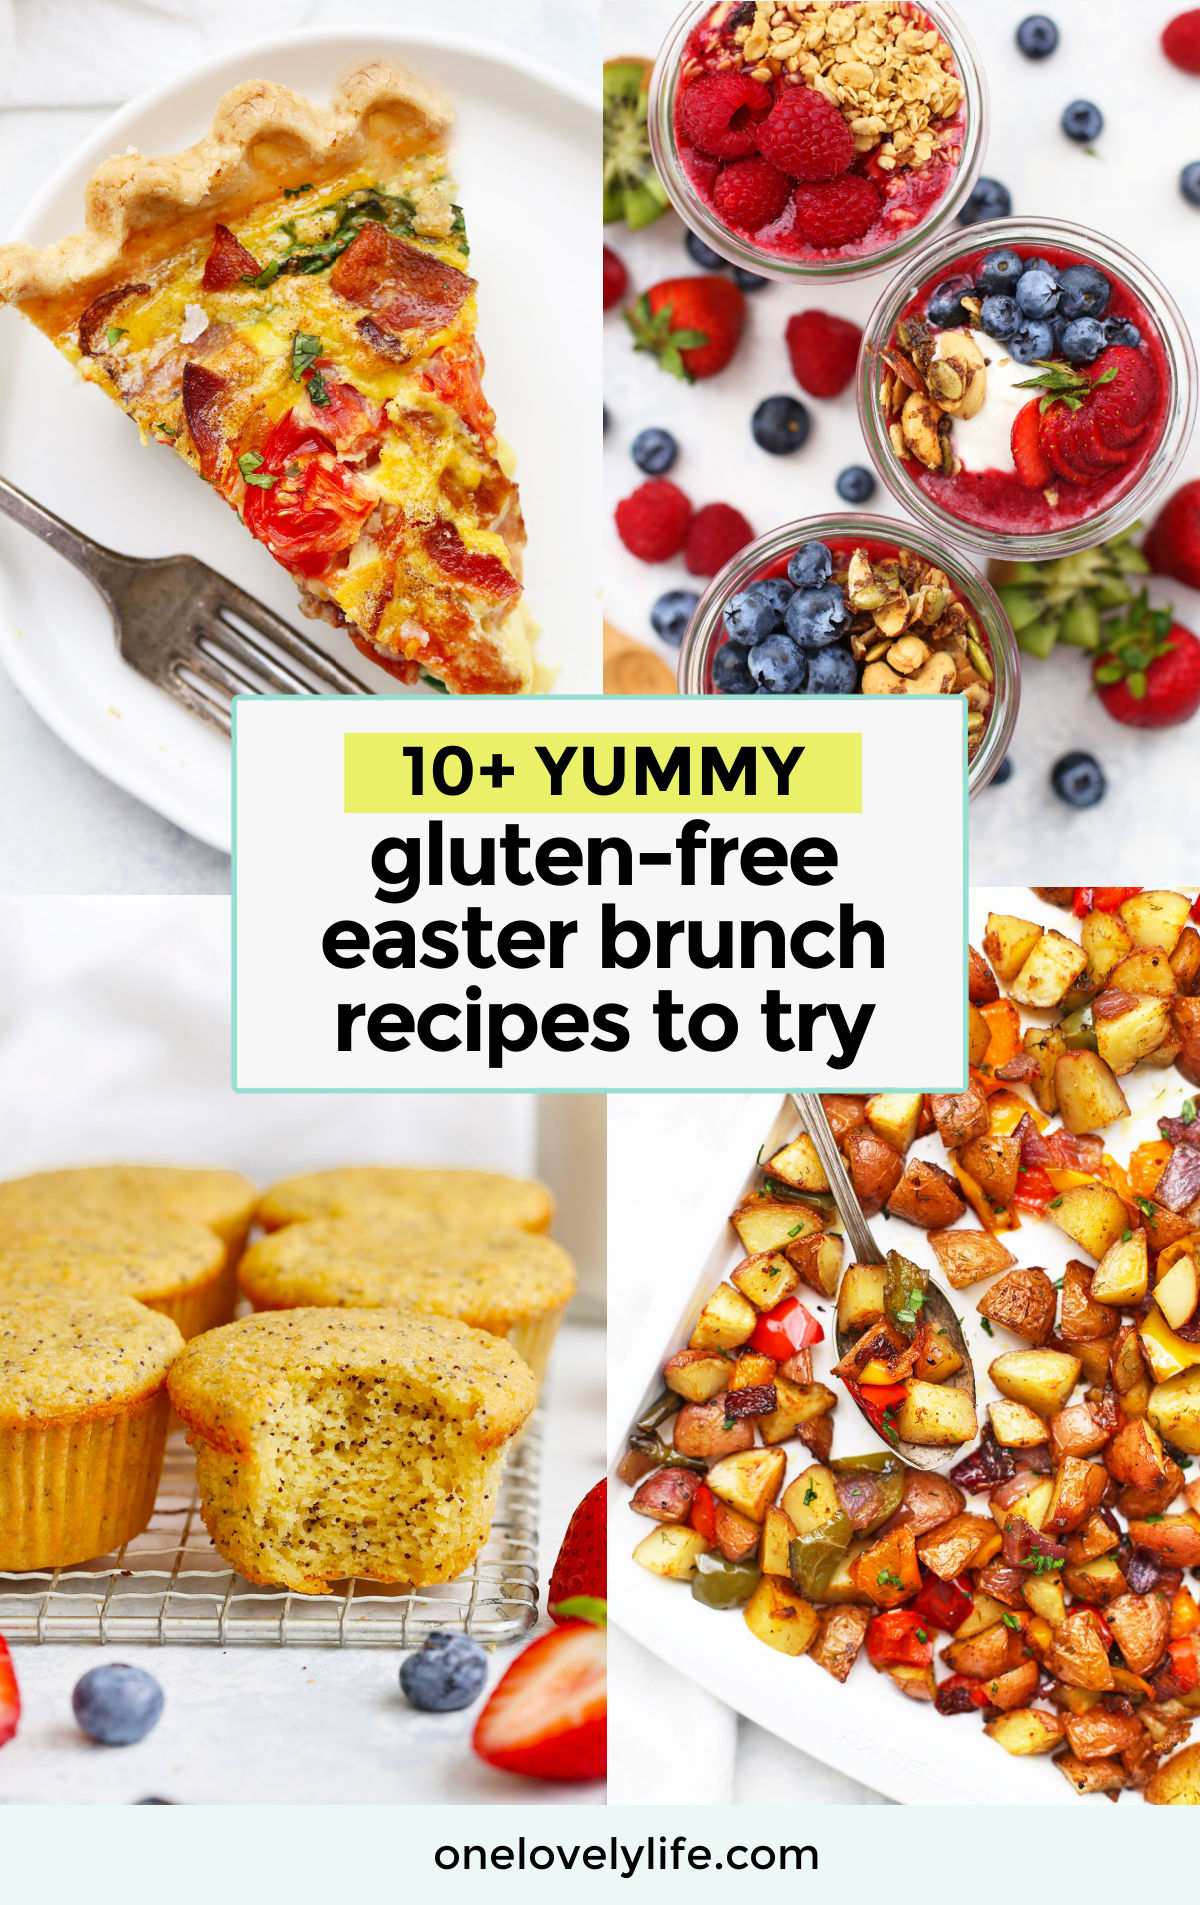 Planning a gluten-free Easter menu this year? We've got 20+ delicious gluten-free Easter recipes for brunch, dinner, and dessert. / gluten-free Easter menu ideas / gluten-free Easter brunch recipes / gluten-free Easter dinner recipes / gluten-free Easter menu recipes / gluten-free recipes for Easter dinner / gluten-free recipes for Easter brunch / gluten-free Easter ideas / what to serve for Easter dinner / gluten-free Easter dessert / Gluten-free Easter breakfast ideas